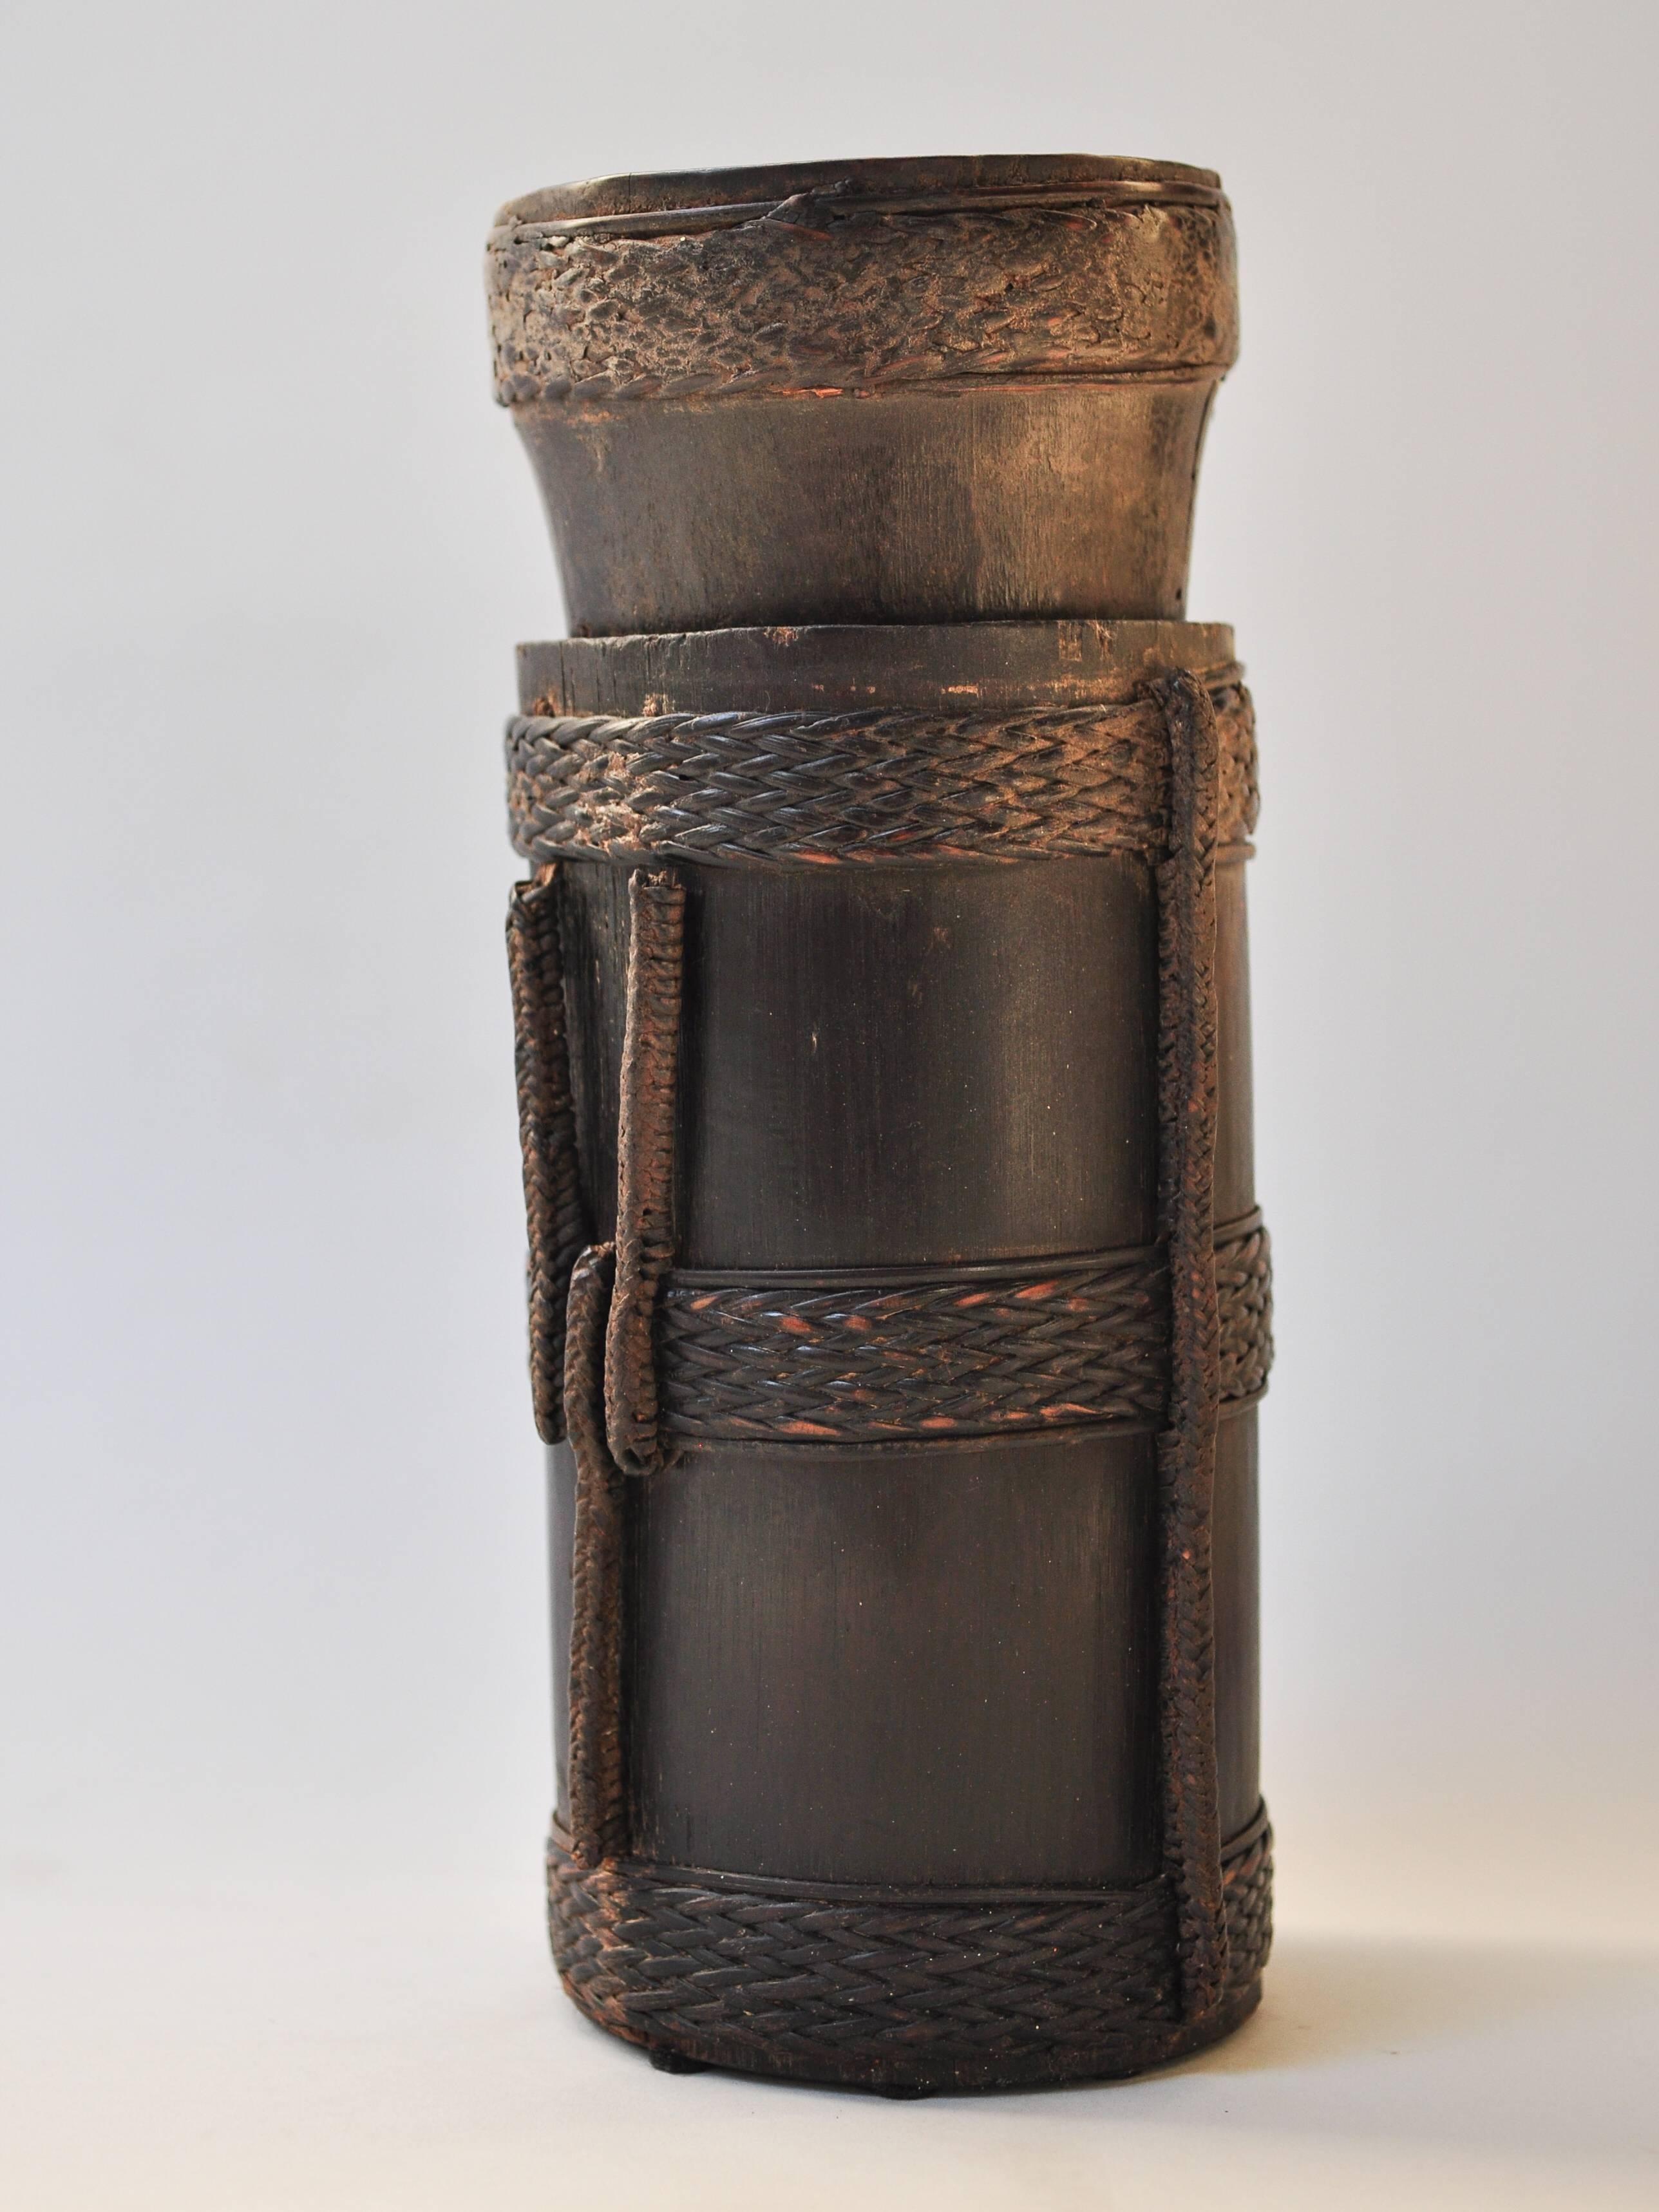 Bamboo container from Nepal with rattan detailing, mid-late 20th century.
Hand fashioned bamboo container from the Nepal with braided rattan and bamboo decoration. It comes from the high mountains of the Tibet Nepal borderland and dates to circa